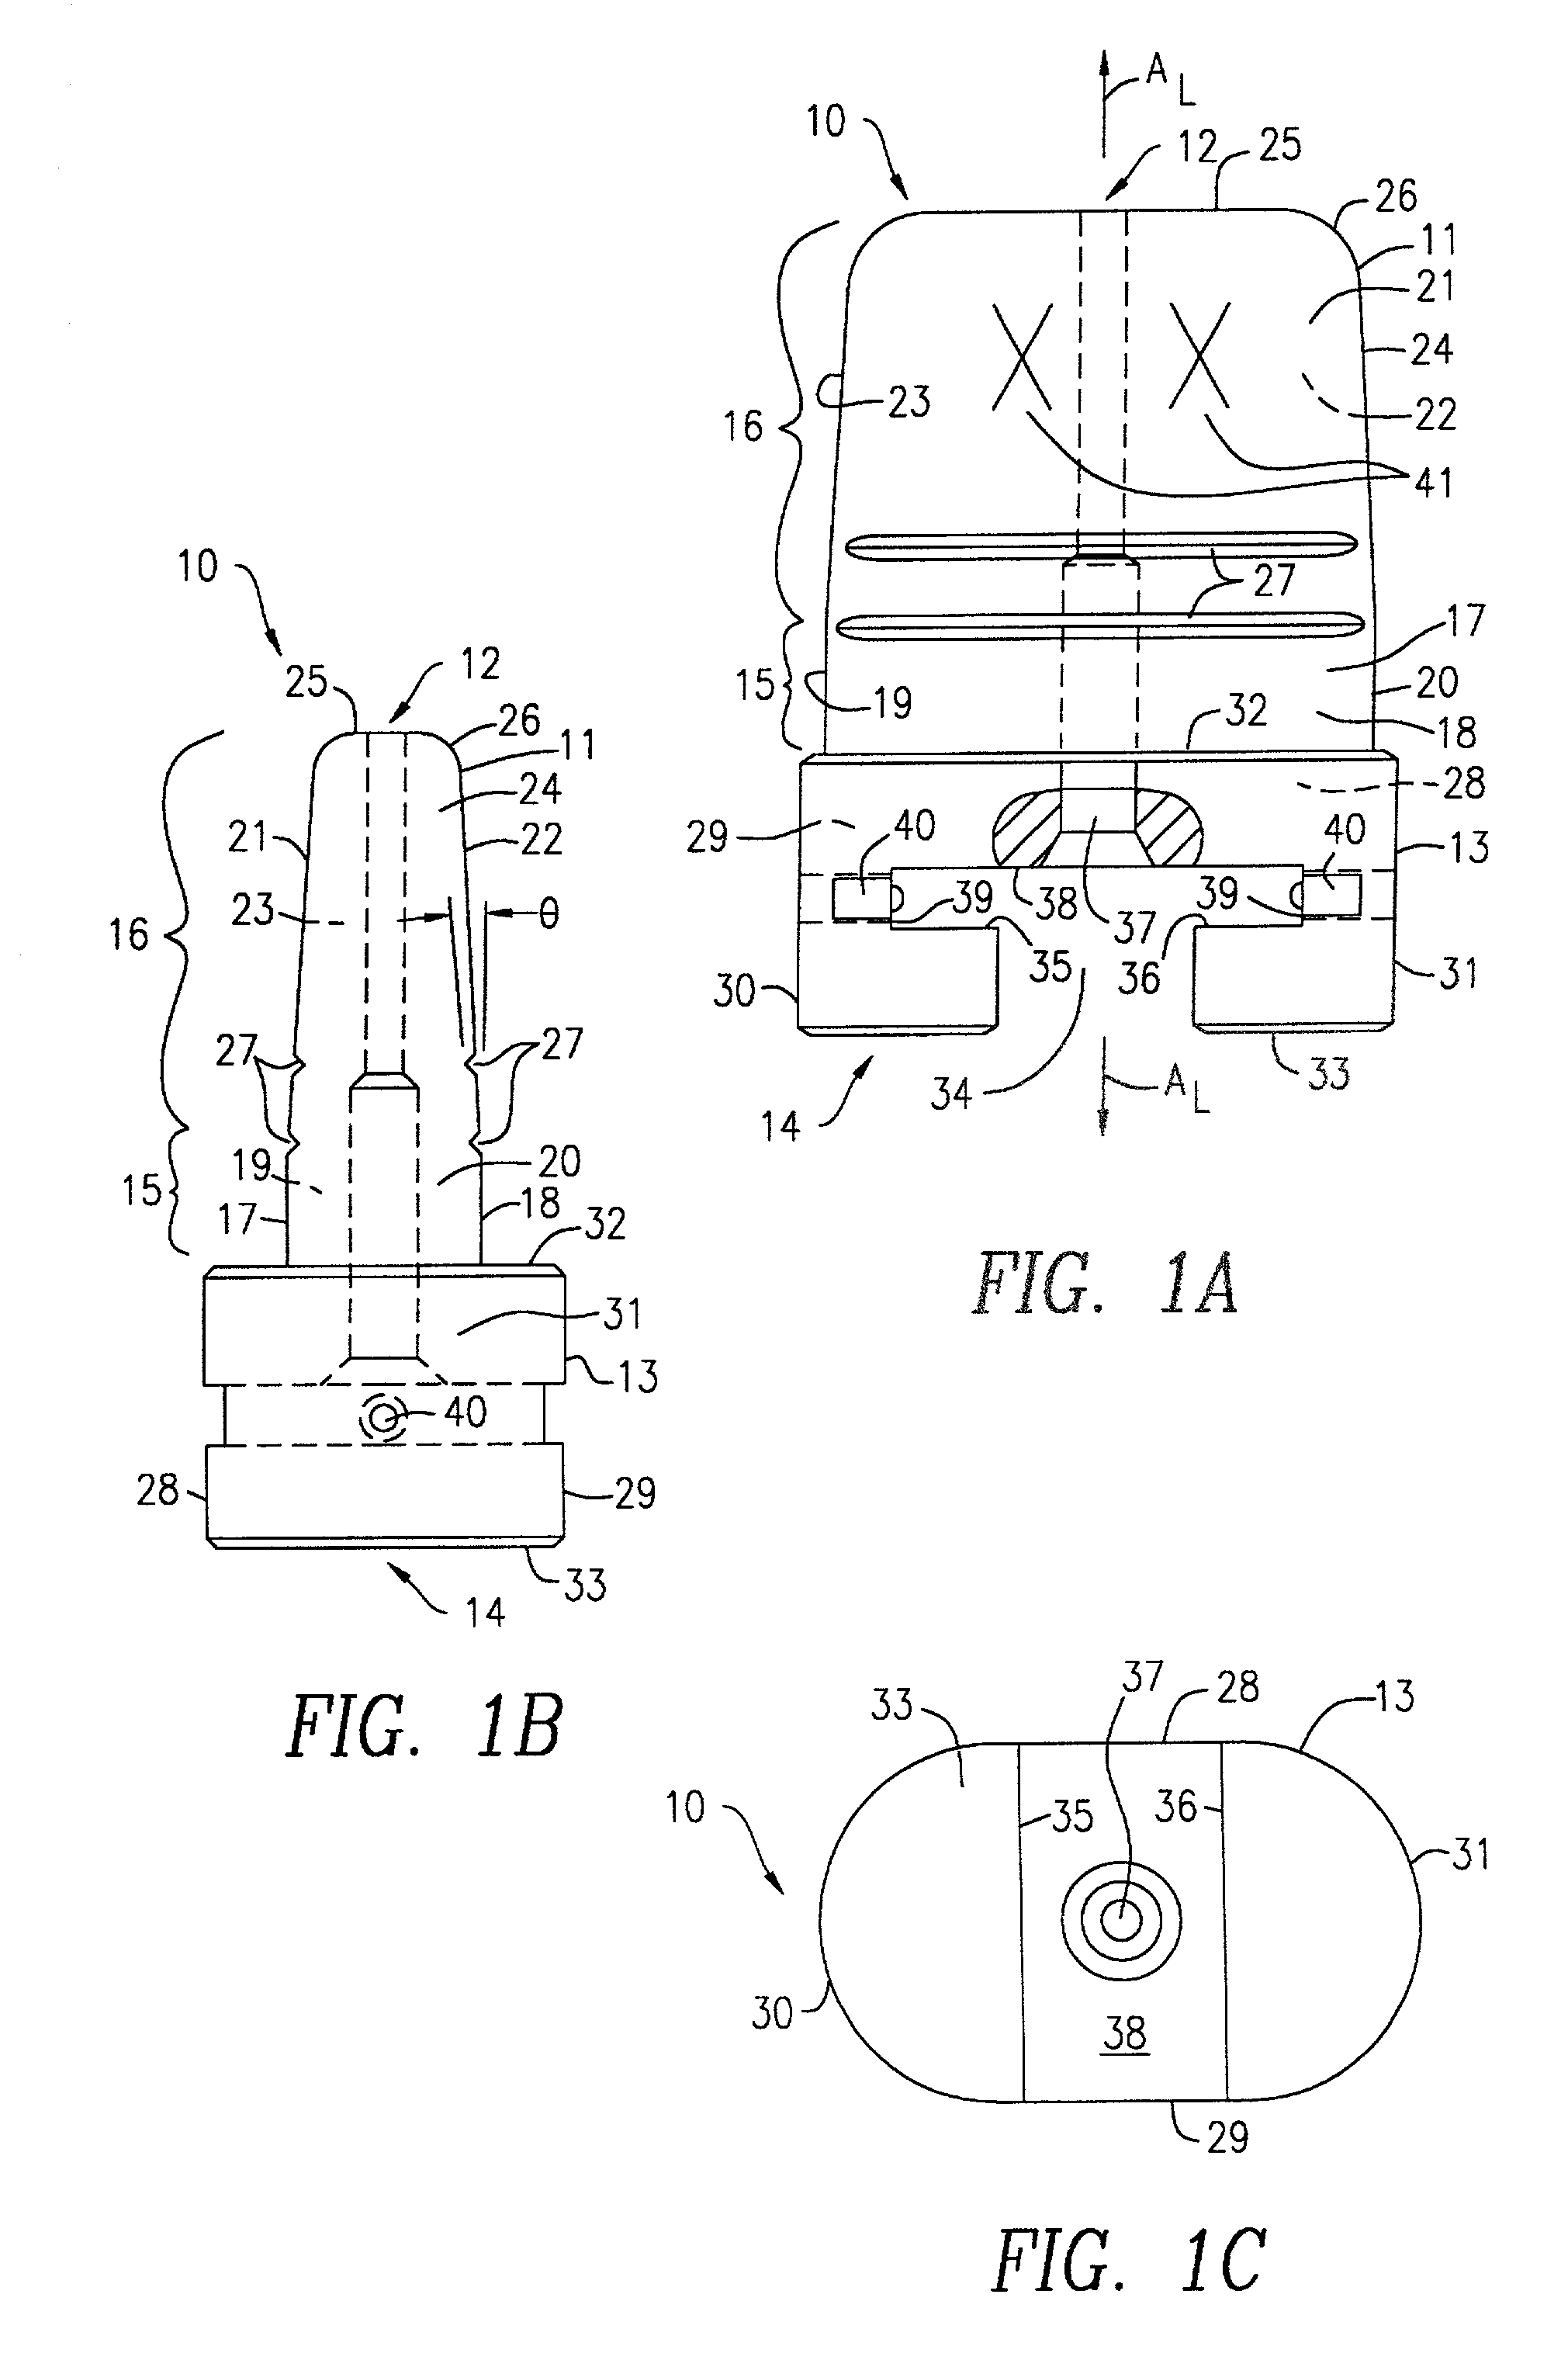 Instrument system for preparing a disc space between adjacent vertebral bodies to receive a repair device